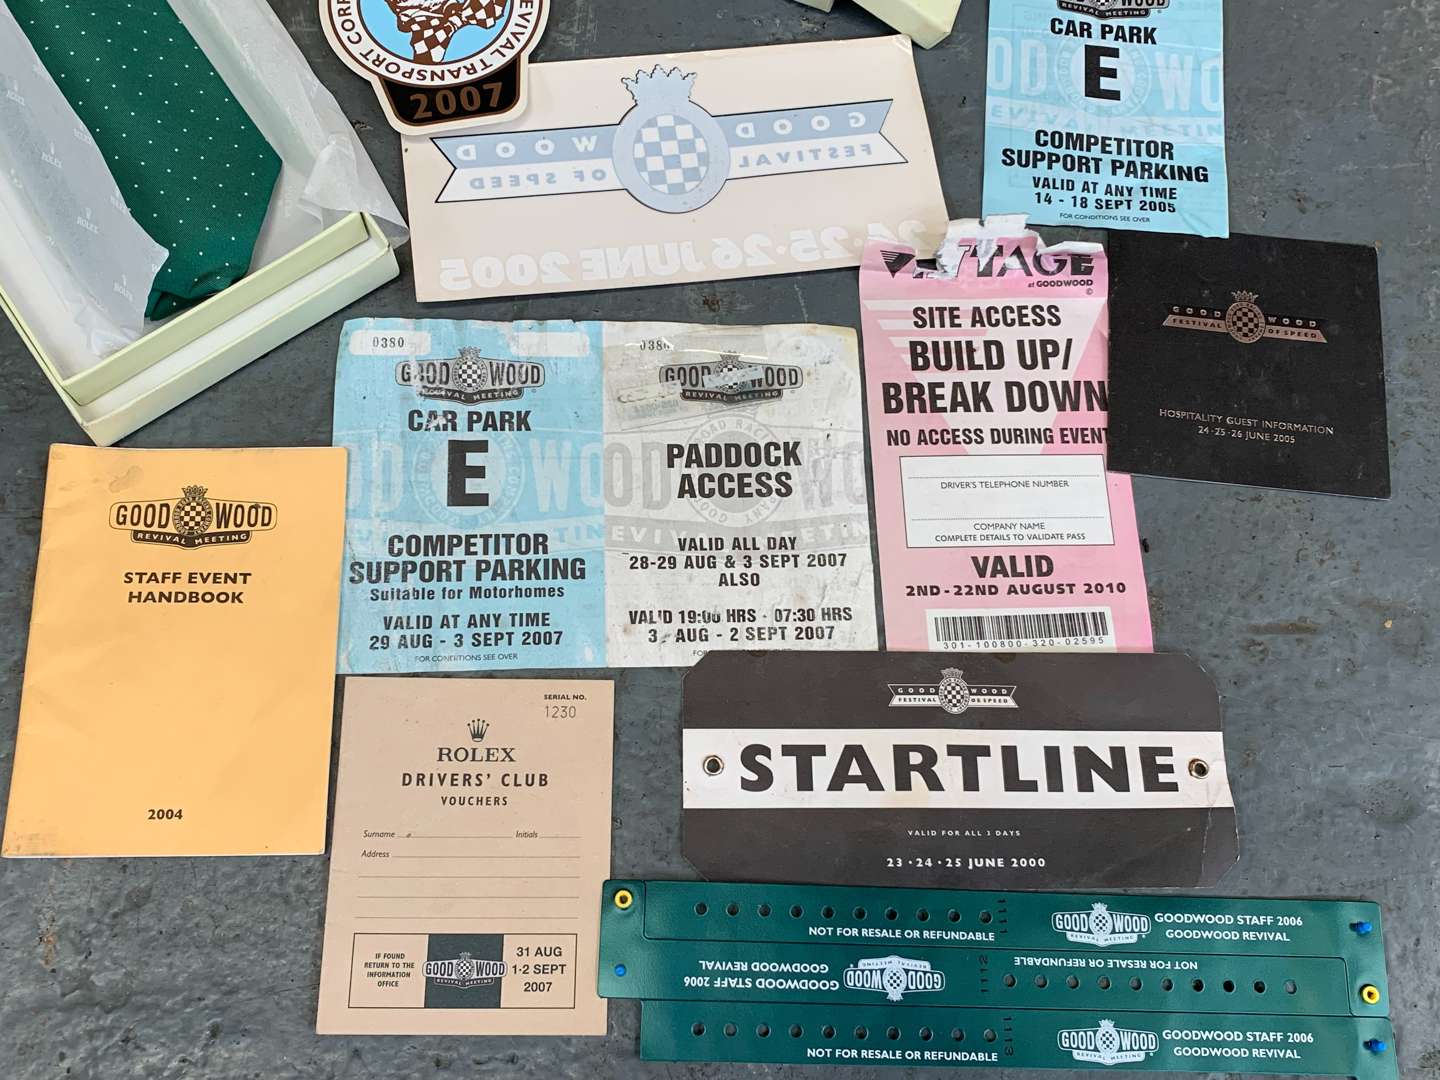 Mixed Lot Of Goodwood Tickets, Rolex Tie, Key Fob Etc - Image 3 of 5